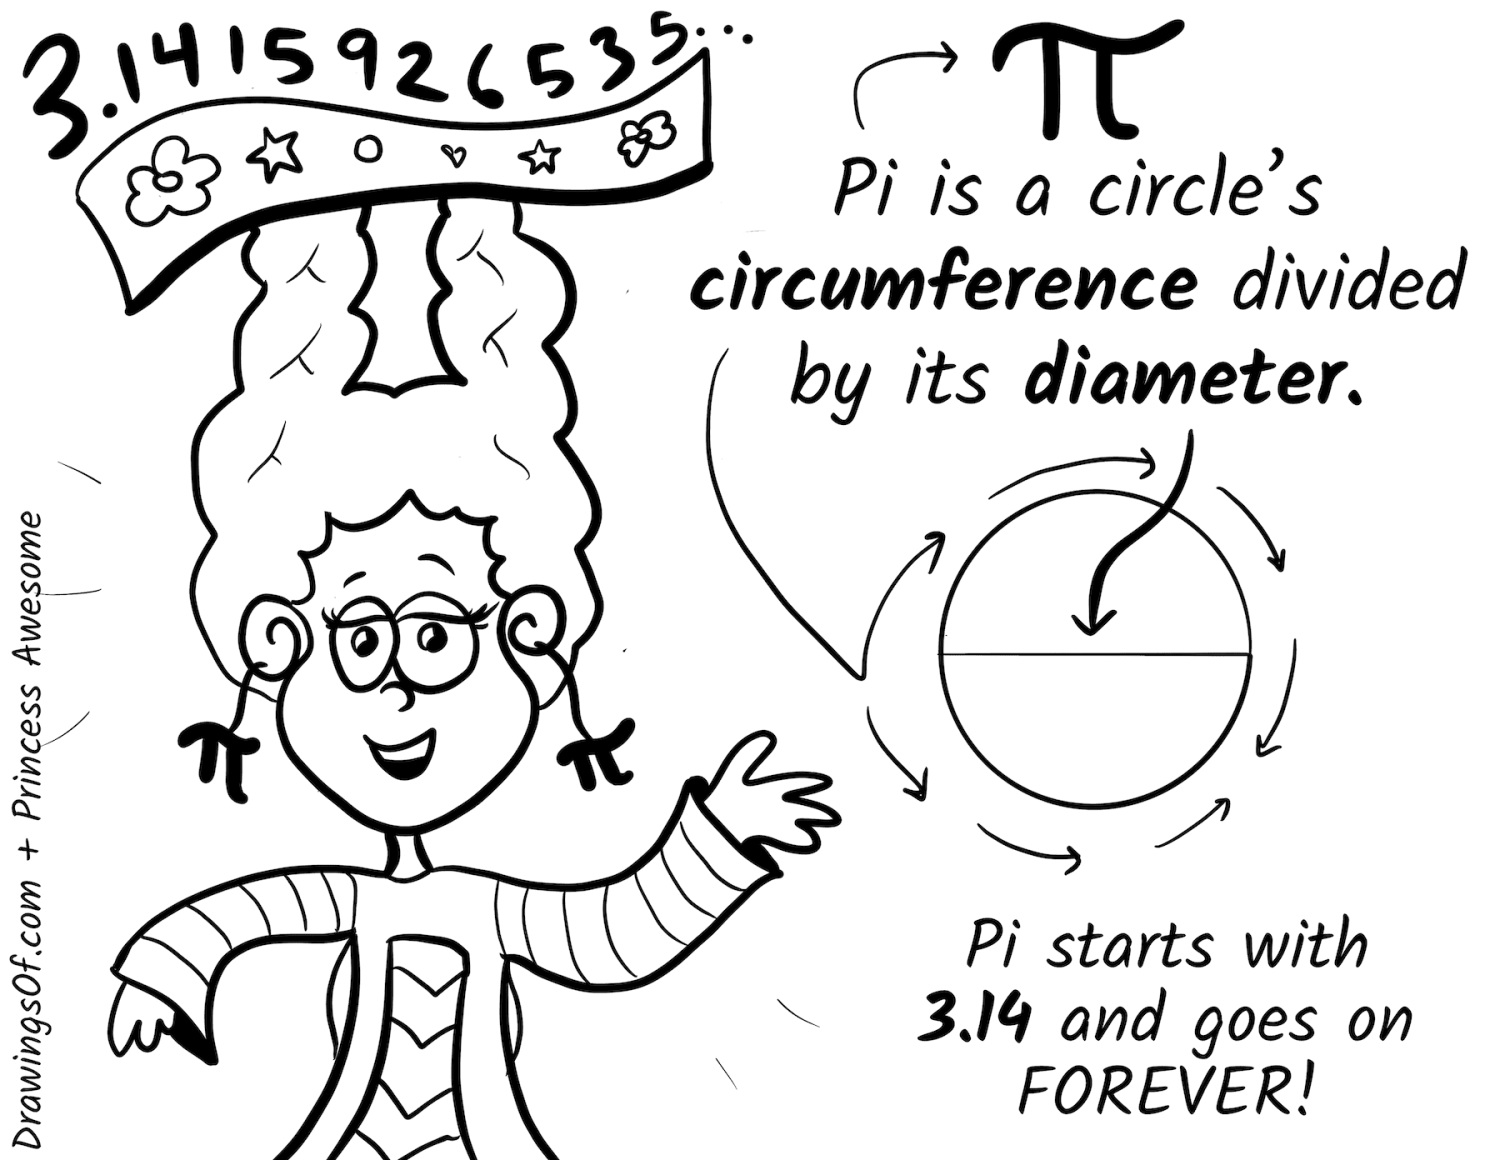 Pi day printable art activity coloring cute cards free